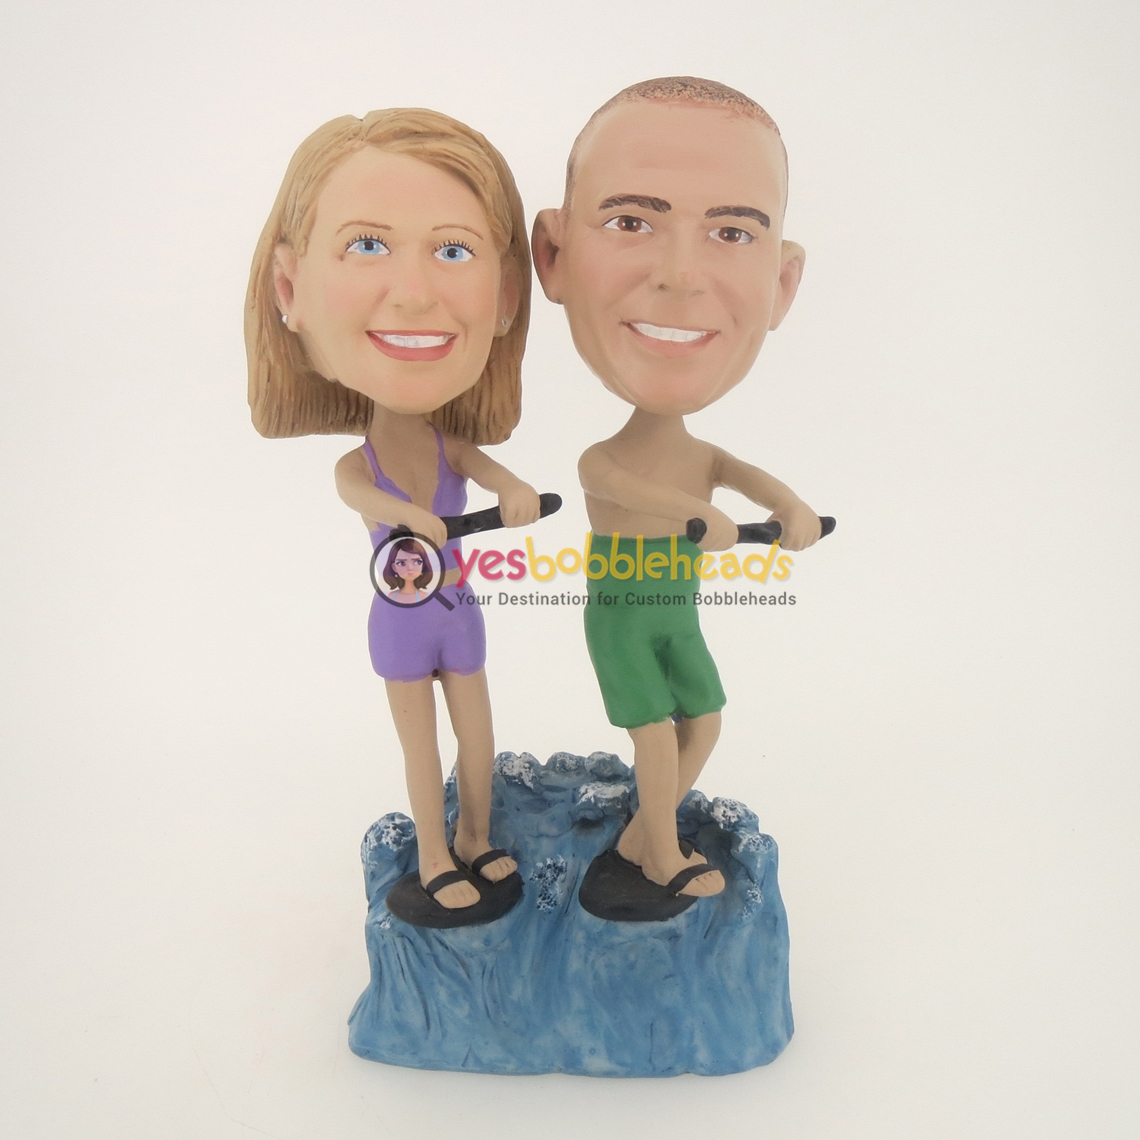 Picture of Custom Bobblehead Doll: Surfing Couple